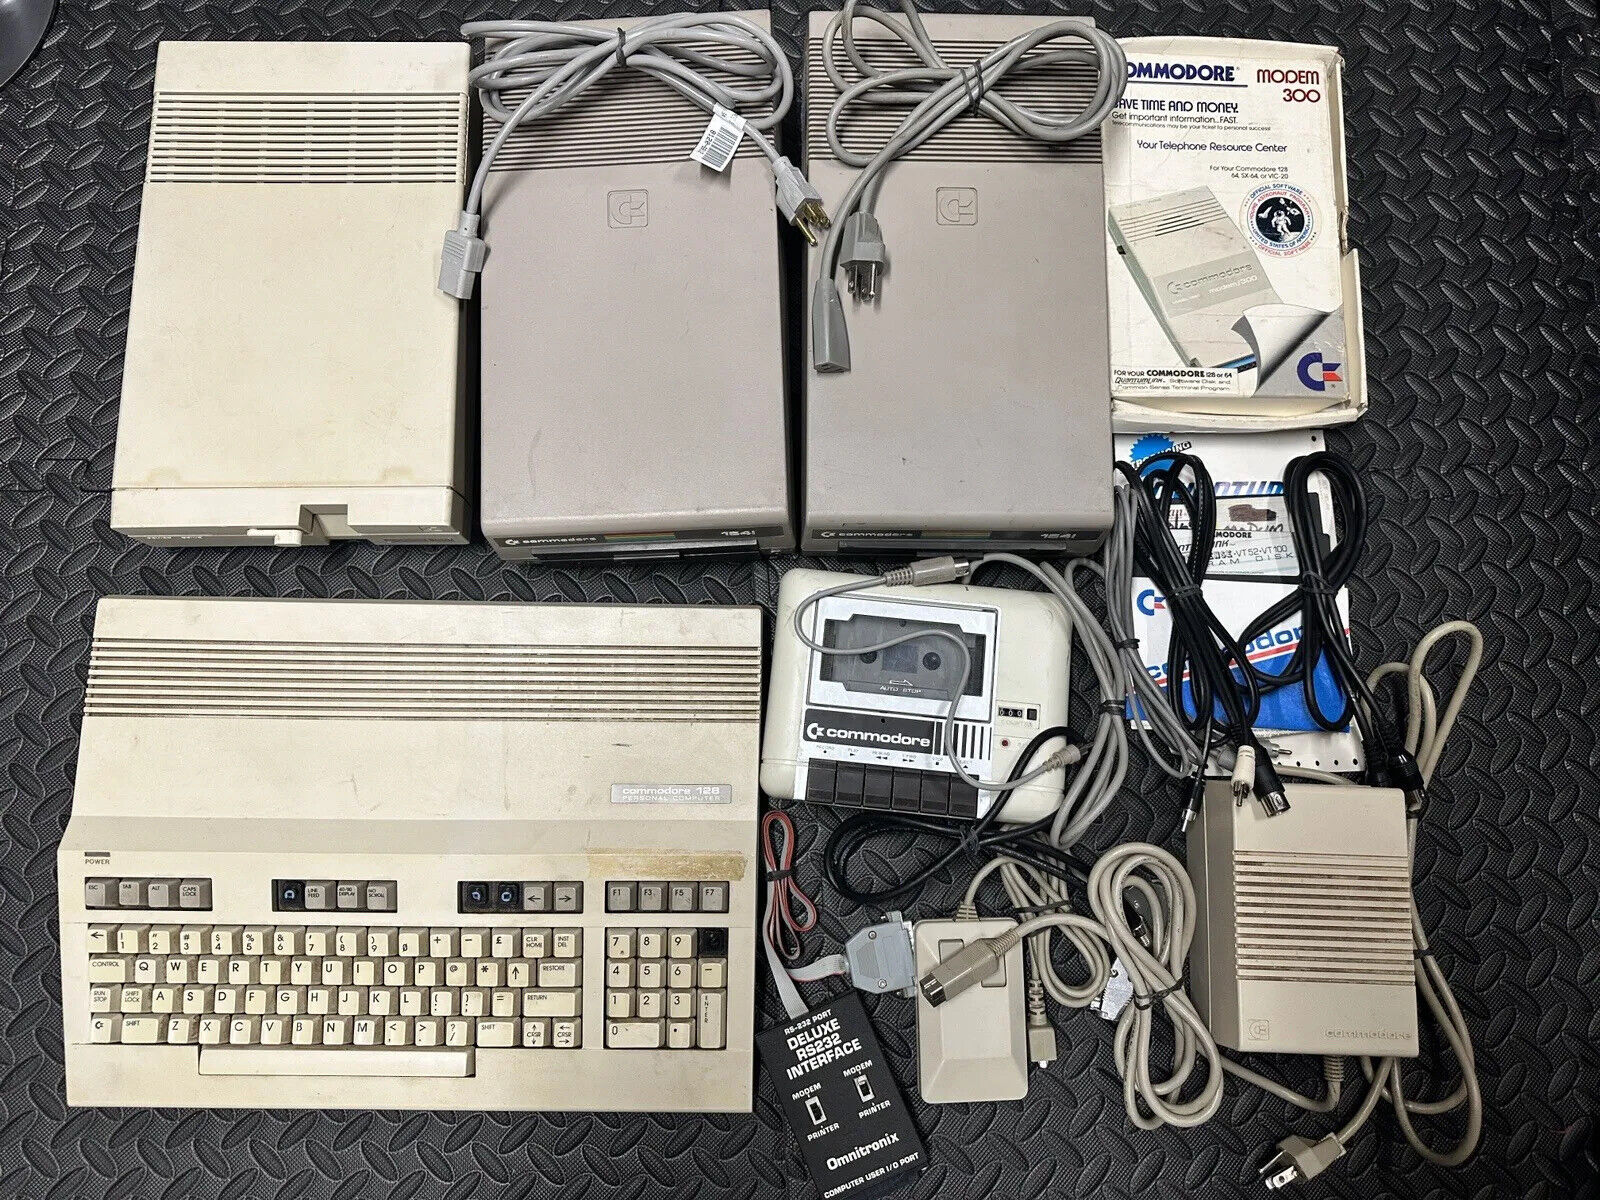 Commodore 128 Computer, 1541, 1571 Disk Drive, 1351 Mouse, C2N, + More UNTESTED